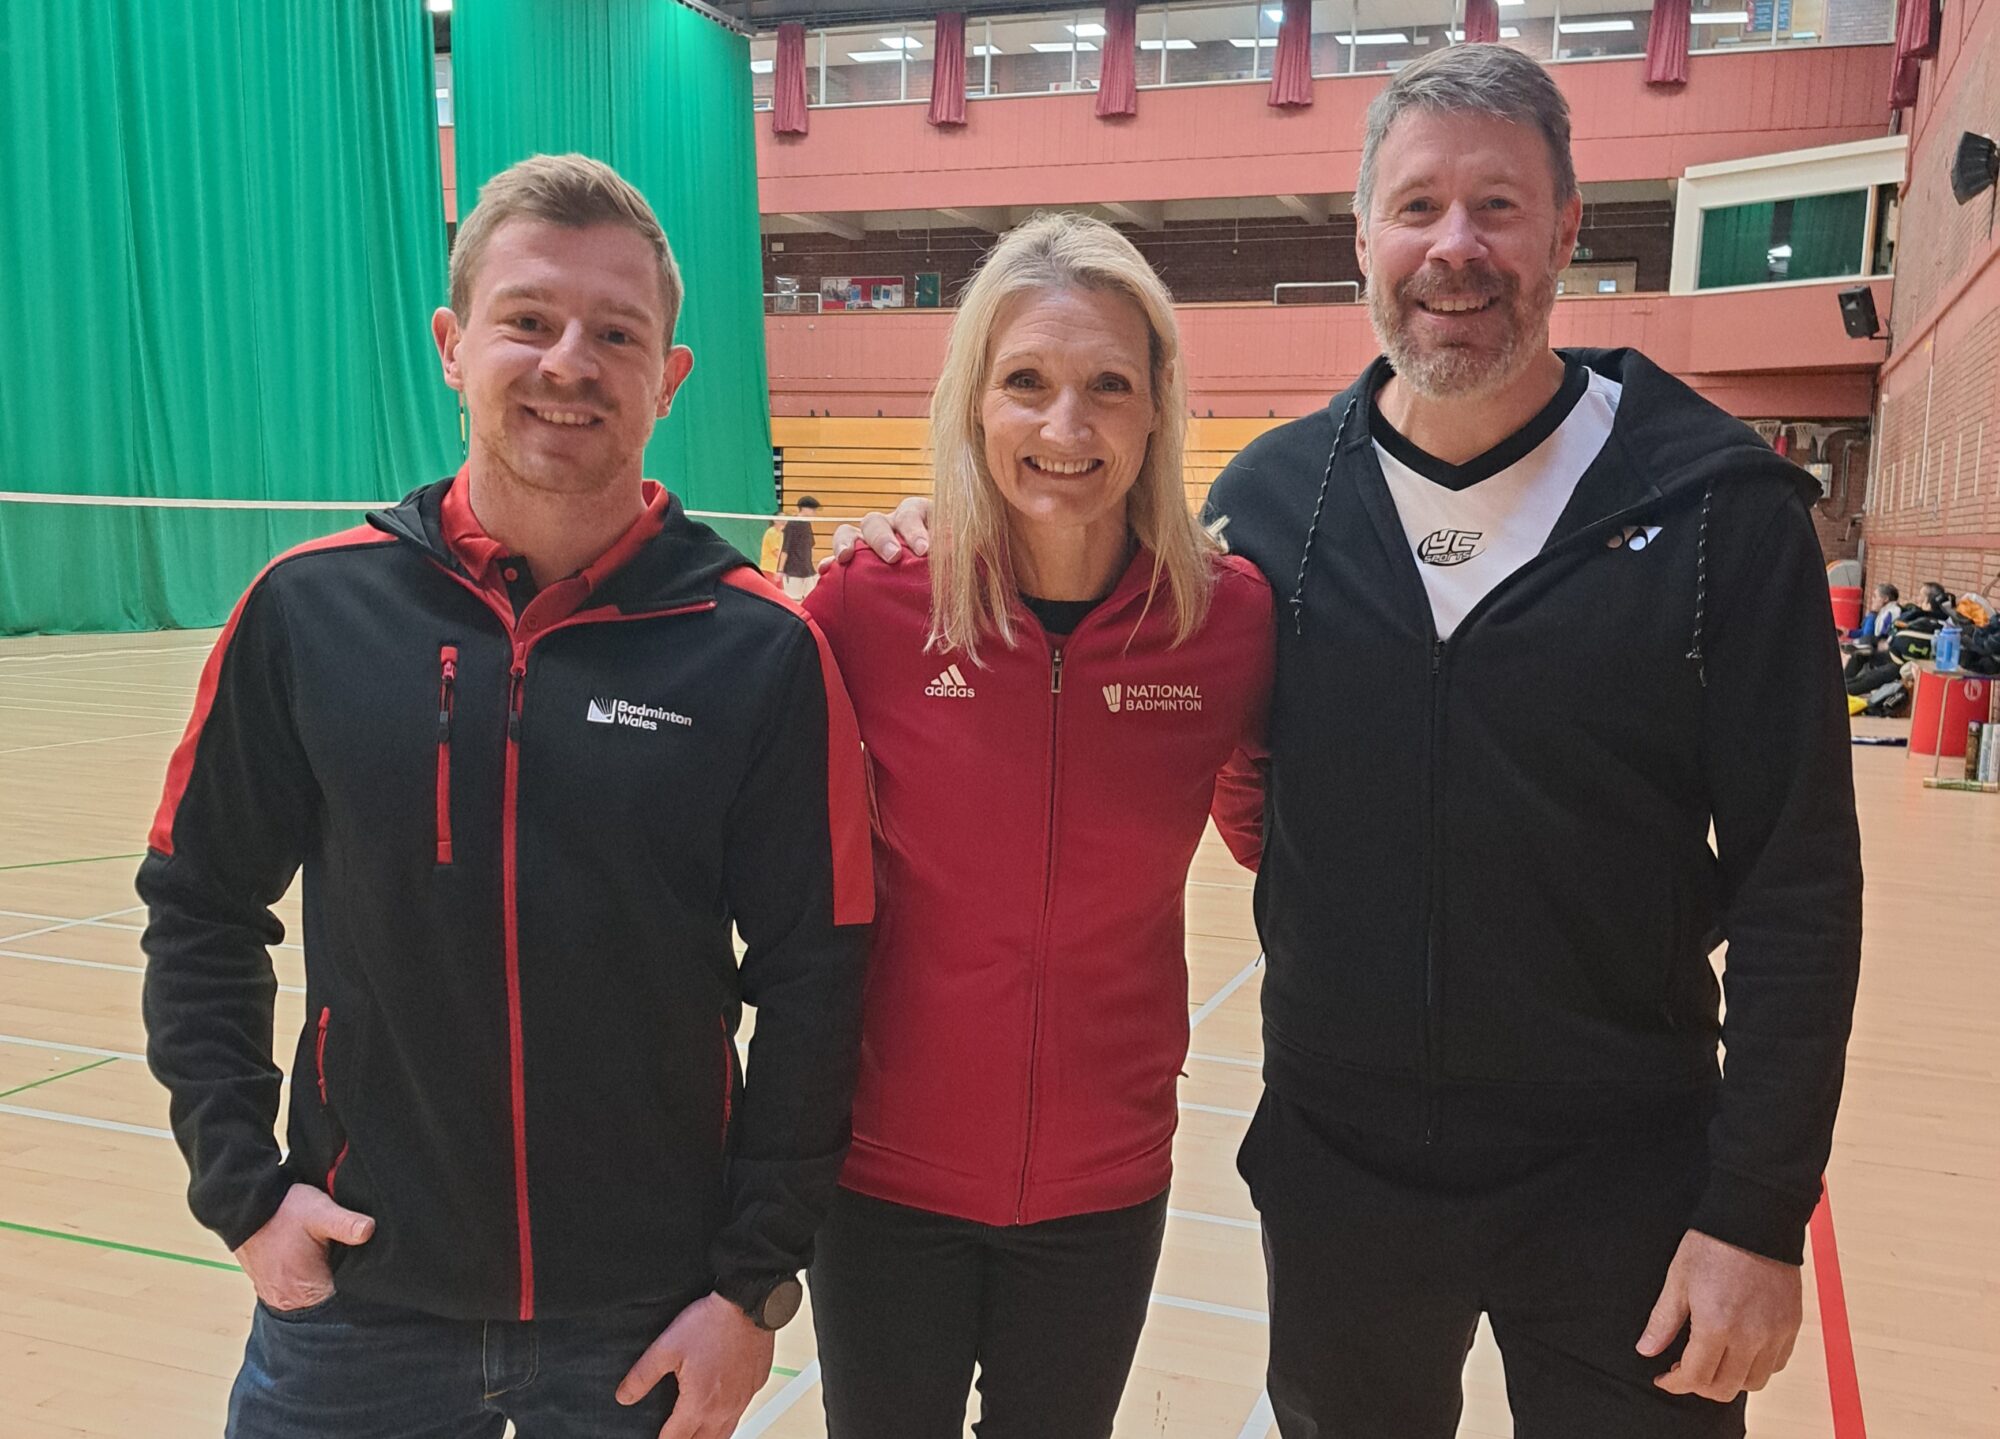 , The launch of an exciting new partnership between Badminton Wales and National Badminton, Badminton Wales